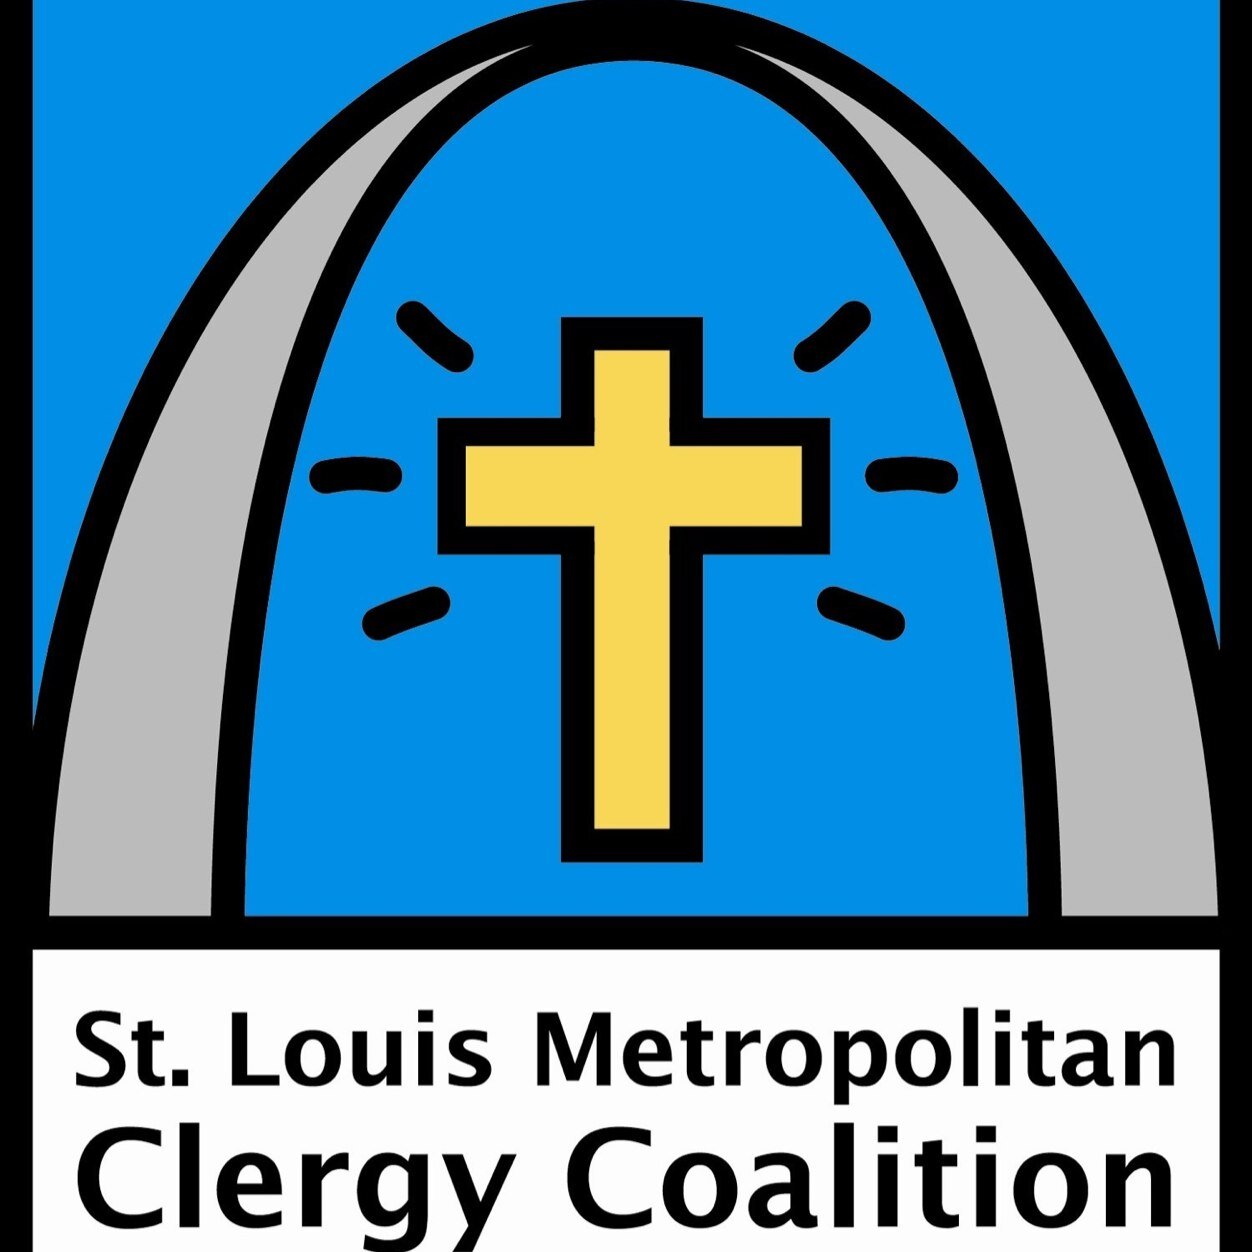 Engaging the Church in developing solutions to the spiritual, social and economic issues affecting STL
http://t.co/BQ7aKUeRBQ